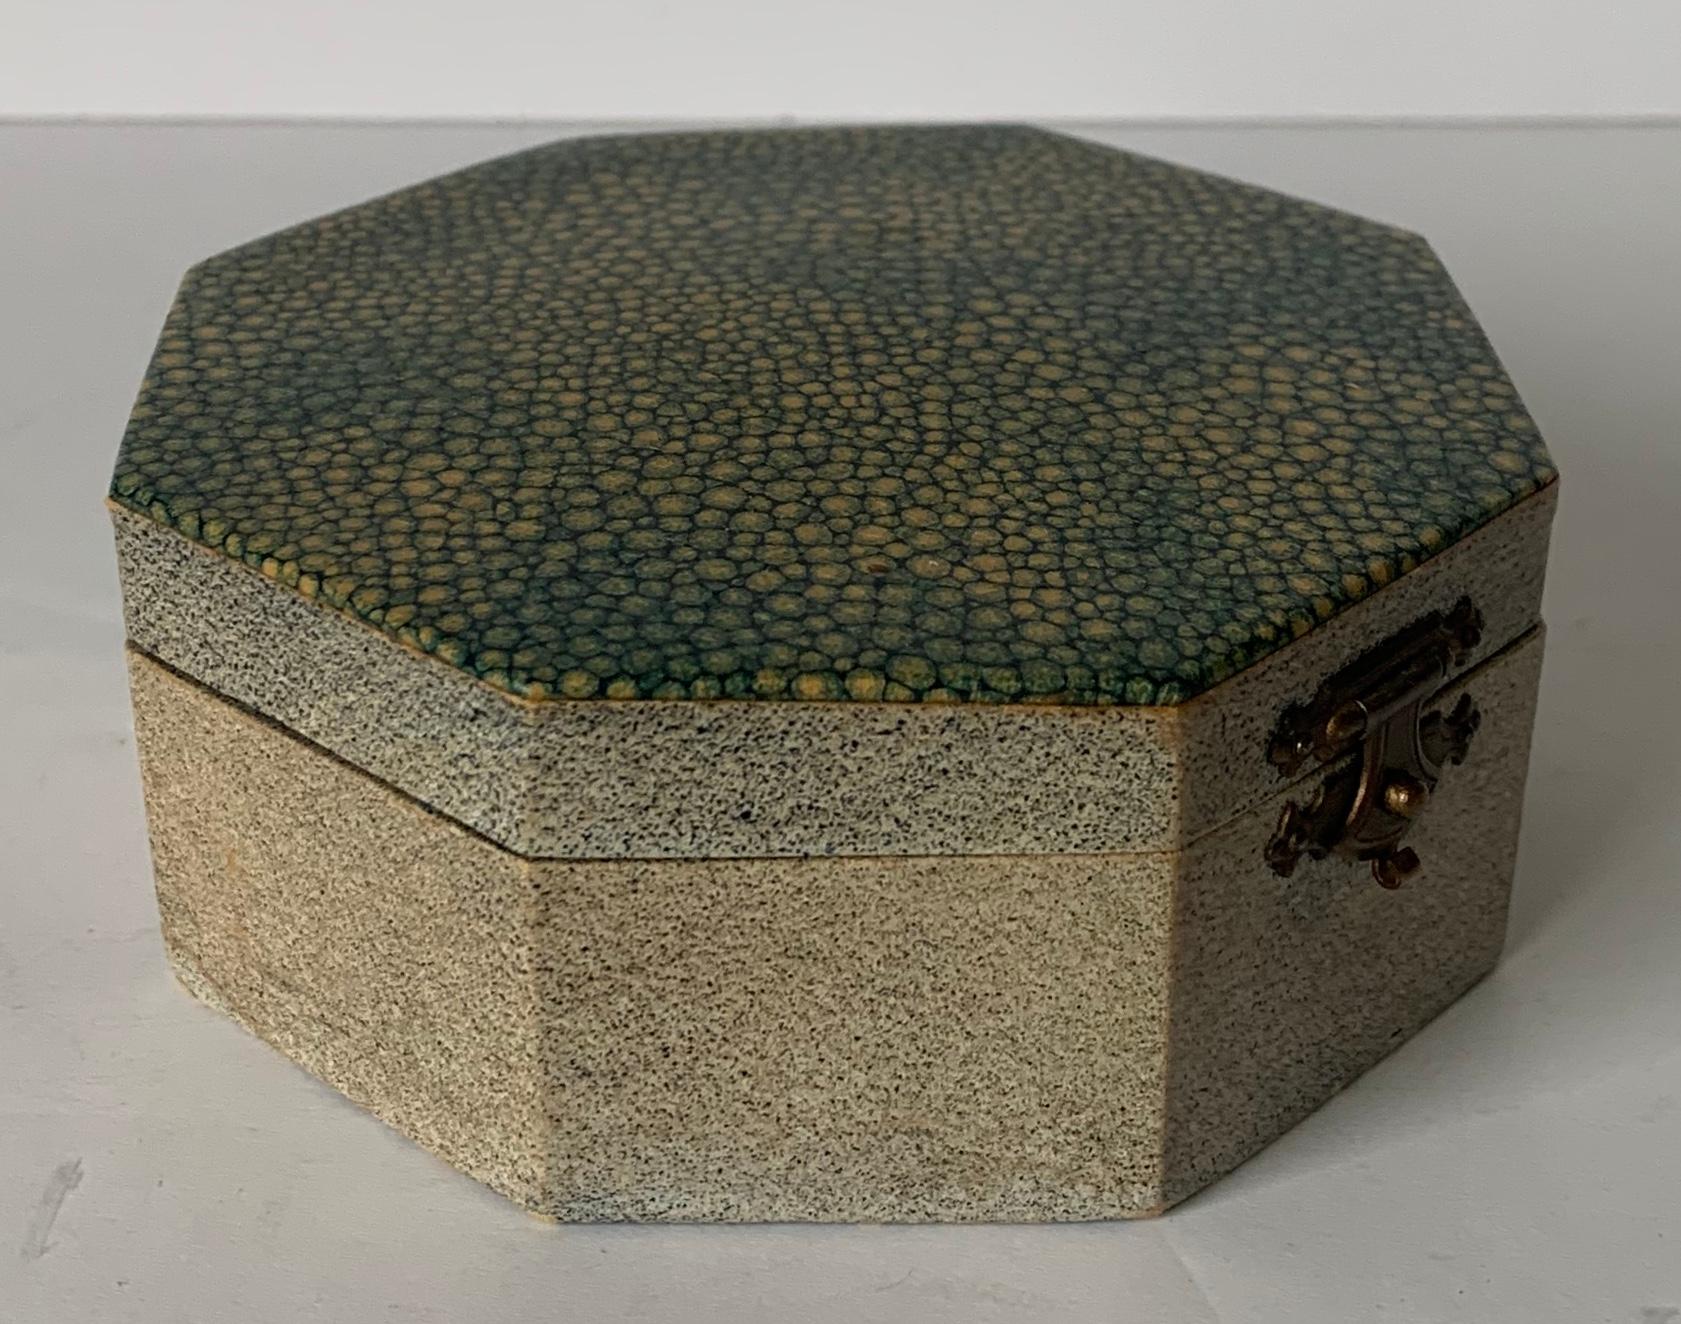 1920s English octagonal faux shagreen vanity box. Shagreen printed papier mâché box. Clamshell lidded box with interior inset mirror and fabric lining.